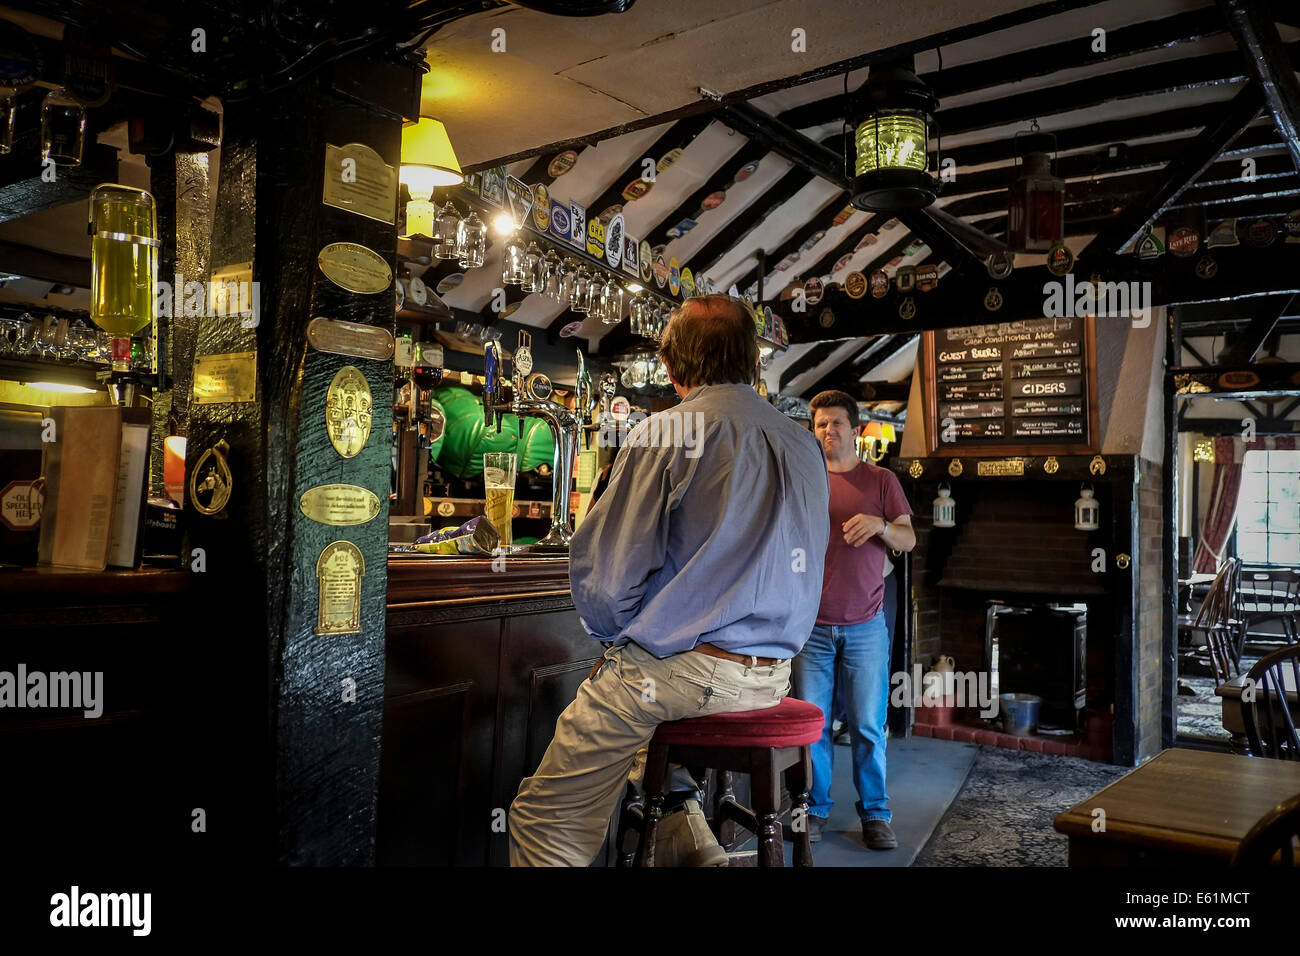 The interior of historic Old Dog public house in Herongate in Essex..  The pub is a 17th century traditional country pub. Stock Photo